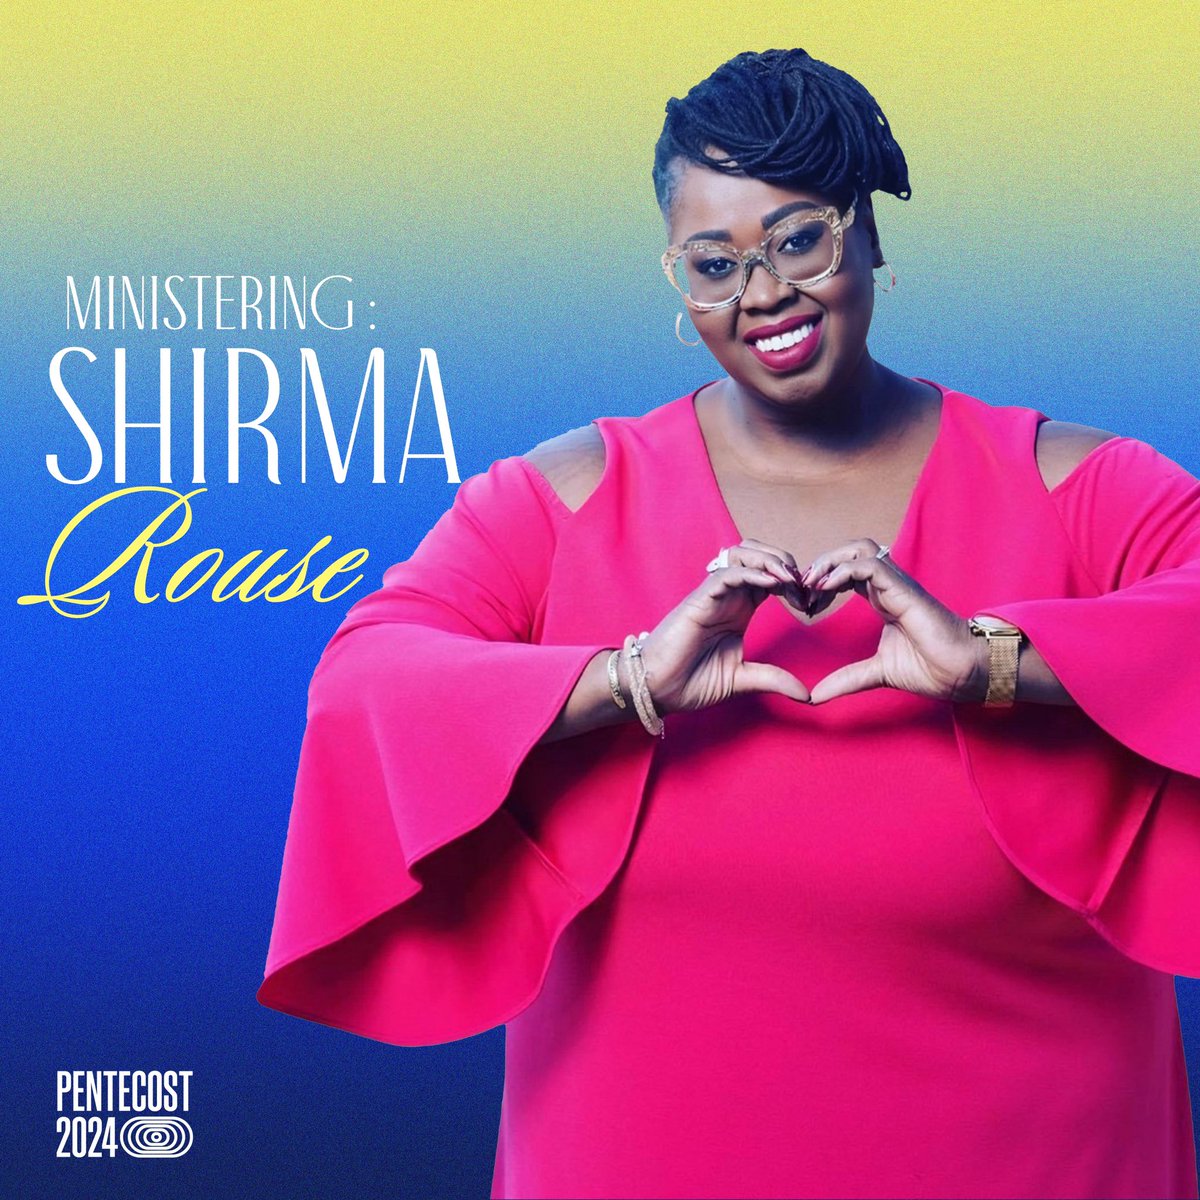 Announcing with great joy: Shirma will grace us with a powerful ministration at Pentecost 2024!🎶✨ Get ready for an unforgettable worship experience. 

Don’t forget to share this post! We hope to see you at #Pentecost2024🔥🔥🔥

💻: Register now pentecostconference.com! 🌐🔥